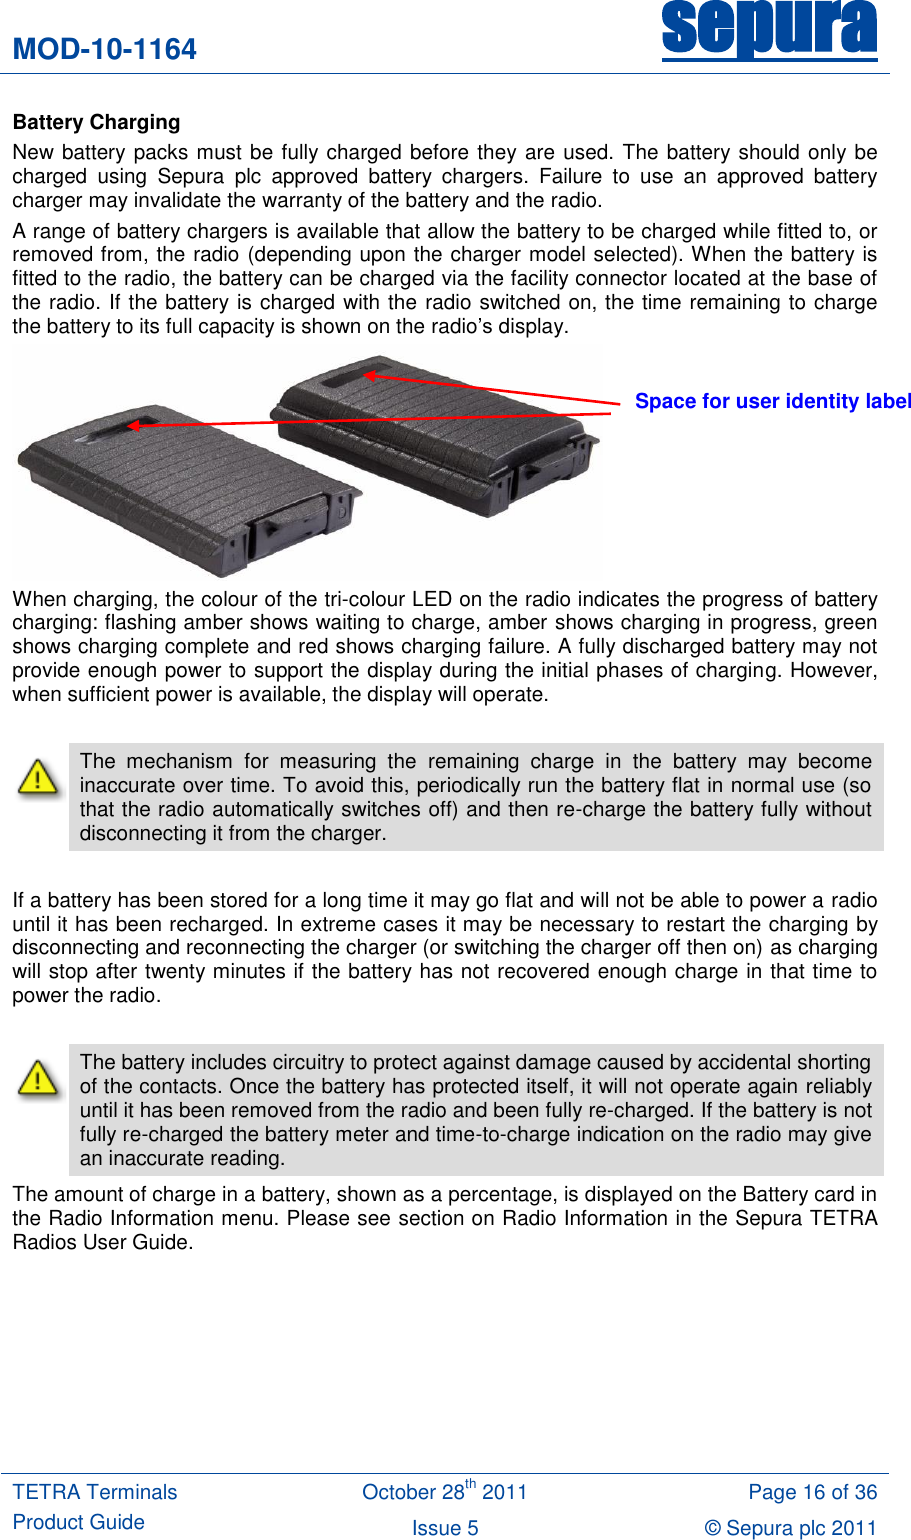 MOD-10-1164 sepura  TETRA Terminals Product Guide October 28th 2011 Page 16 of 36 Issue 5 © Sepura plc 2011   Battery Charging New battery packs must be fully charged before they are used. The battery should only be charged  using  Sepura  plc  approved  battery  chargers.  Failure  to  use  an  approved  battery charger may invalidate the warranty of the battery and the radio. A range of battery chargers is available that allow the battery to be charged while fitted to, or removed from, the radio (depending upon the charger model selected). When the battery is fitted to the radio, the battery can be charged via the facility connector located at the base of the radio. If the battery is charged with the radio switched on, the time remaining to charge the battery to its full capacity is shown on the radio‟s display.  When charging, the colour of the tri-colour LED on the radio indicates the progress of battery charging: flashing amber shows waiting to charge, amber shows charging in progress, green shows charging complete and red shows charging failure. A fully discharged battery may not provide enough power to support the display during the initial phases of charging. However, when sufficient power is available, the display will operate.   The  mechanism  for  measuring  the  remaining  charge  in  the  battery  may  become inaccurate over time. To avoid this, periodically run the battery flat in normal use (so that the radio automatically switches off) and then re-charge the battery fully without disconnecting it from the charger.      If a battery has been stored for a long time it may go flat and will not be able to power a radio until it has been recharged. In extreme cases it may be necessary to restart the charging by disconnecting and reconnecting the charger (or switching the charger off then on) as charging will stop after twenty minutes if the battery has not recovered enough charge in that time to power the radio.   The battery includes circuitry to protect against damage caused by accidental shorting of the contacts. Once the battery has protected itself, it will not operate again reliably until it has been removed from the radio and been fully re-charged. If the battery is not fully re-charged the battery meter and time-to-charge indication on the radio may give an inaccurate reading. The amount of charge in a battery, shown as a percentage, is displayed on the Battery card in the Radio Information menu. Please see section on Radio Information in the Sepura TETRA Radios User Guide.  Space for user identity label 